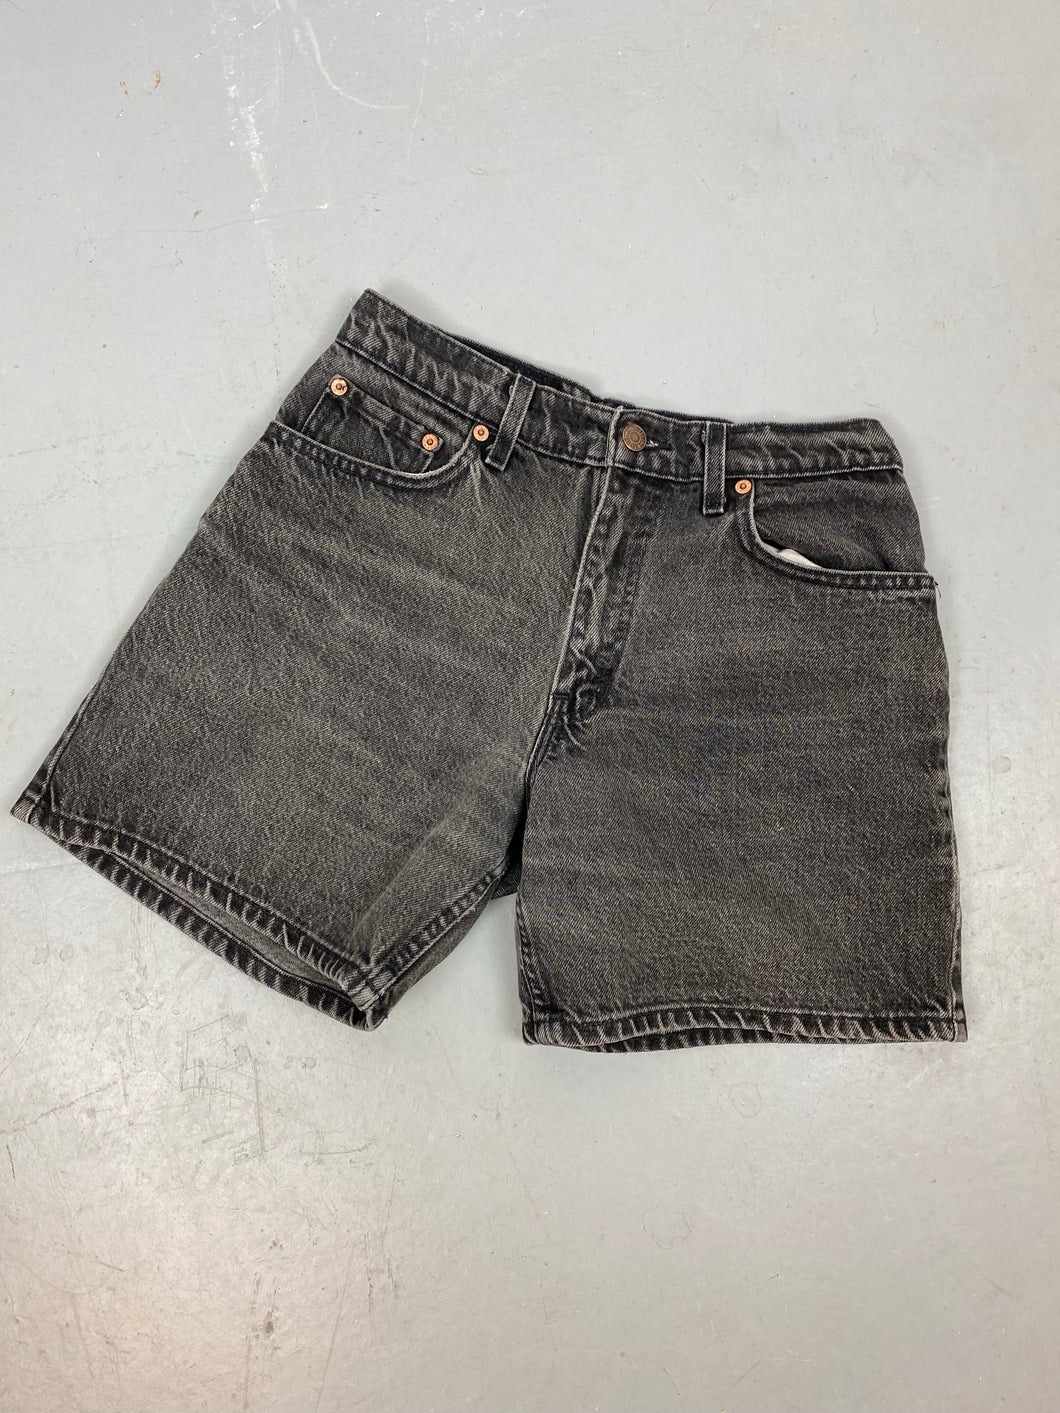 90s high waisted Levi’s denim shorts - 28in